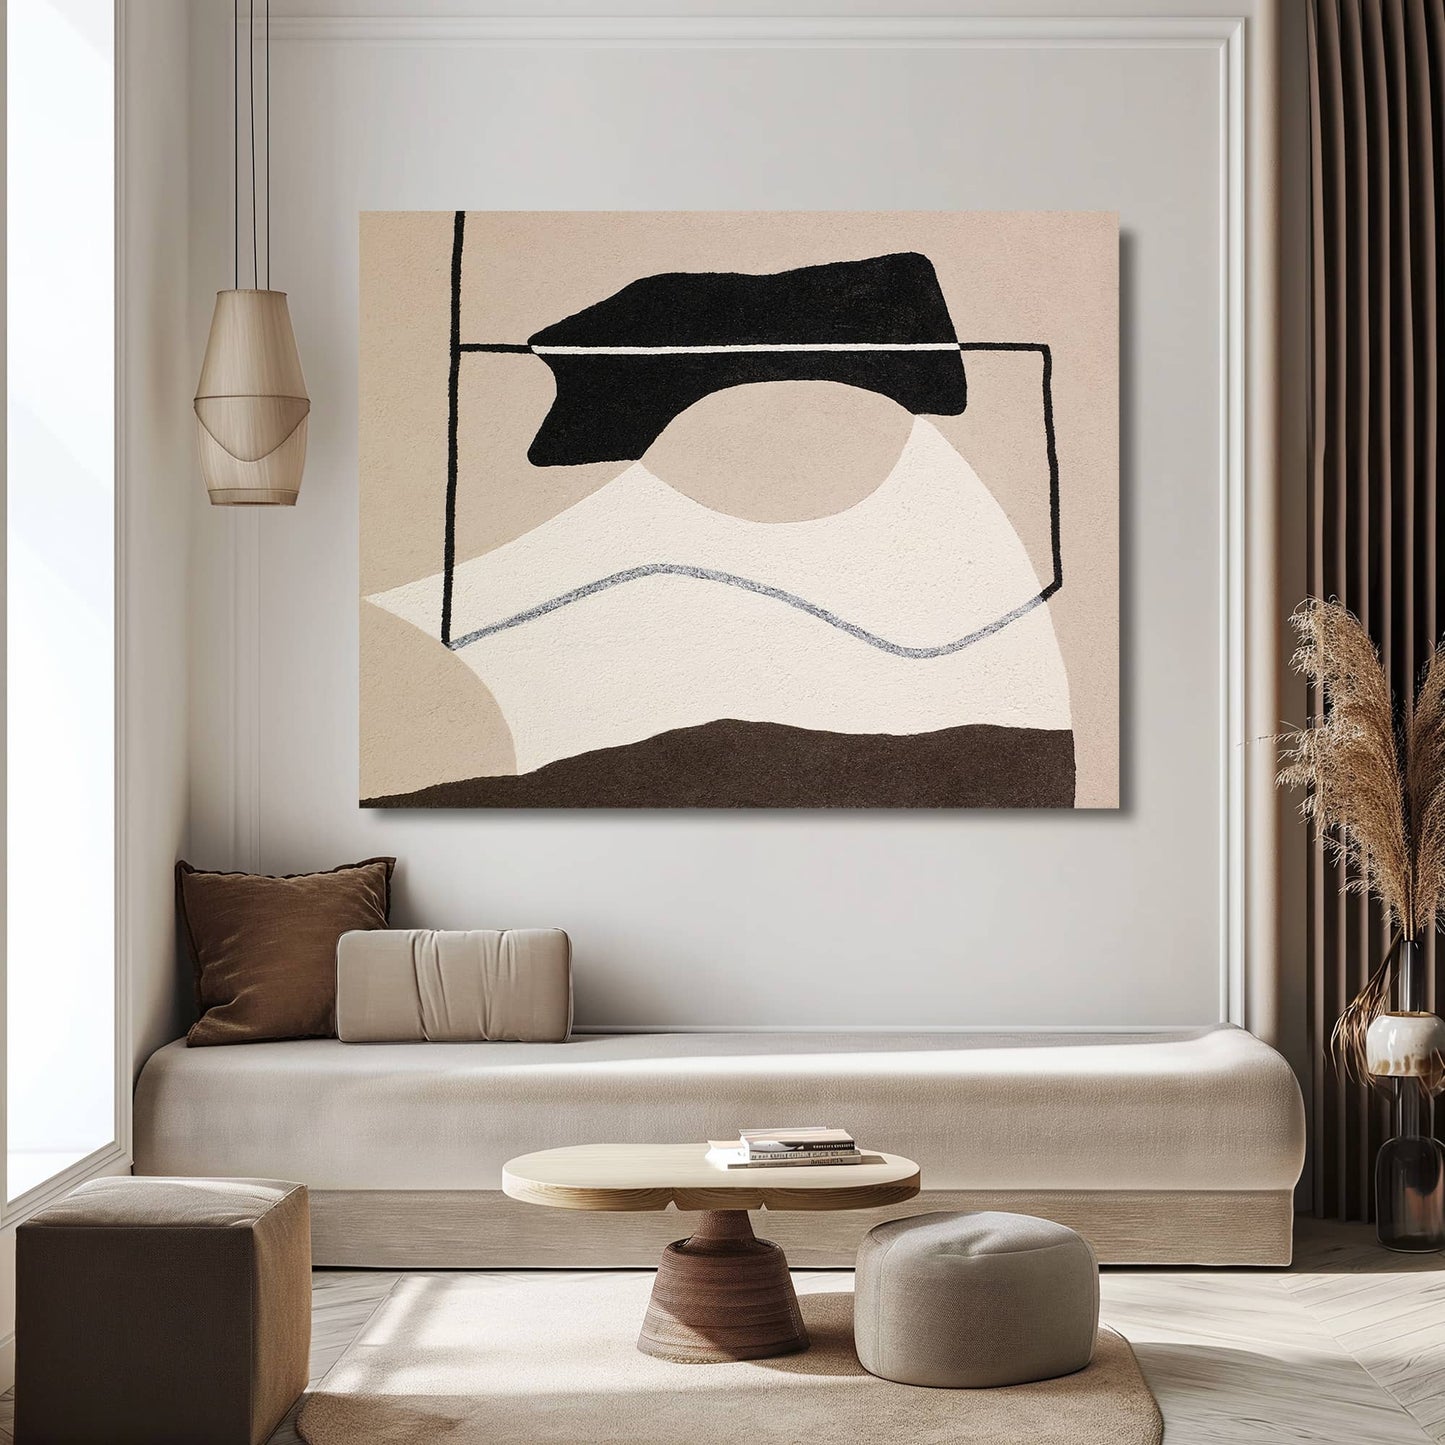 "VACANT STARE: Hand-painted Landscape shaped abstract textured wall art painting depicting an abstract hollow eye, in shades of tan, brown, cream, and white, hanging in the lounge."